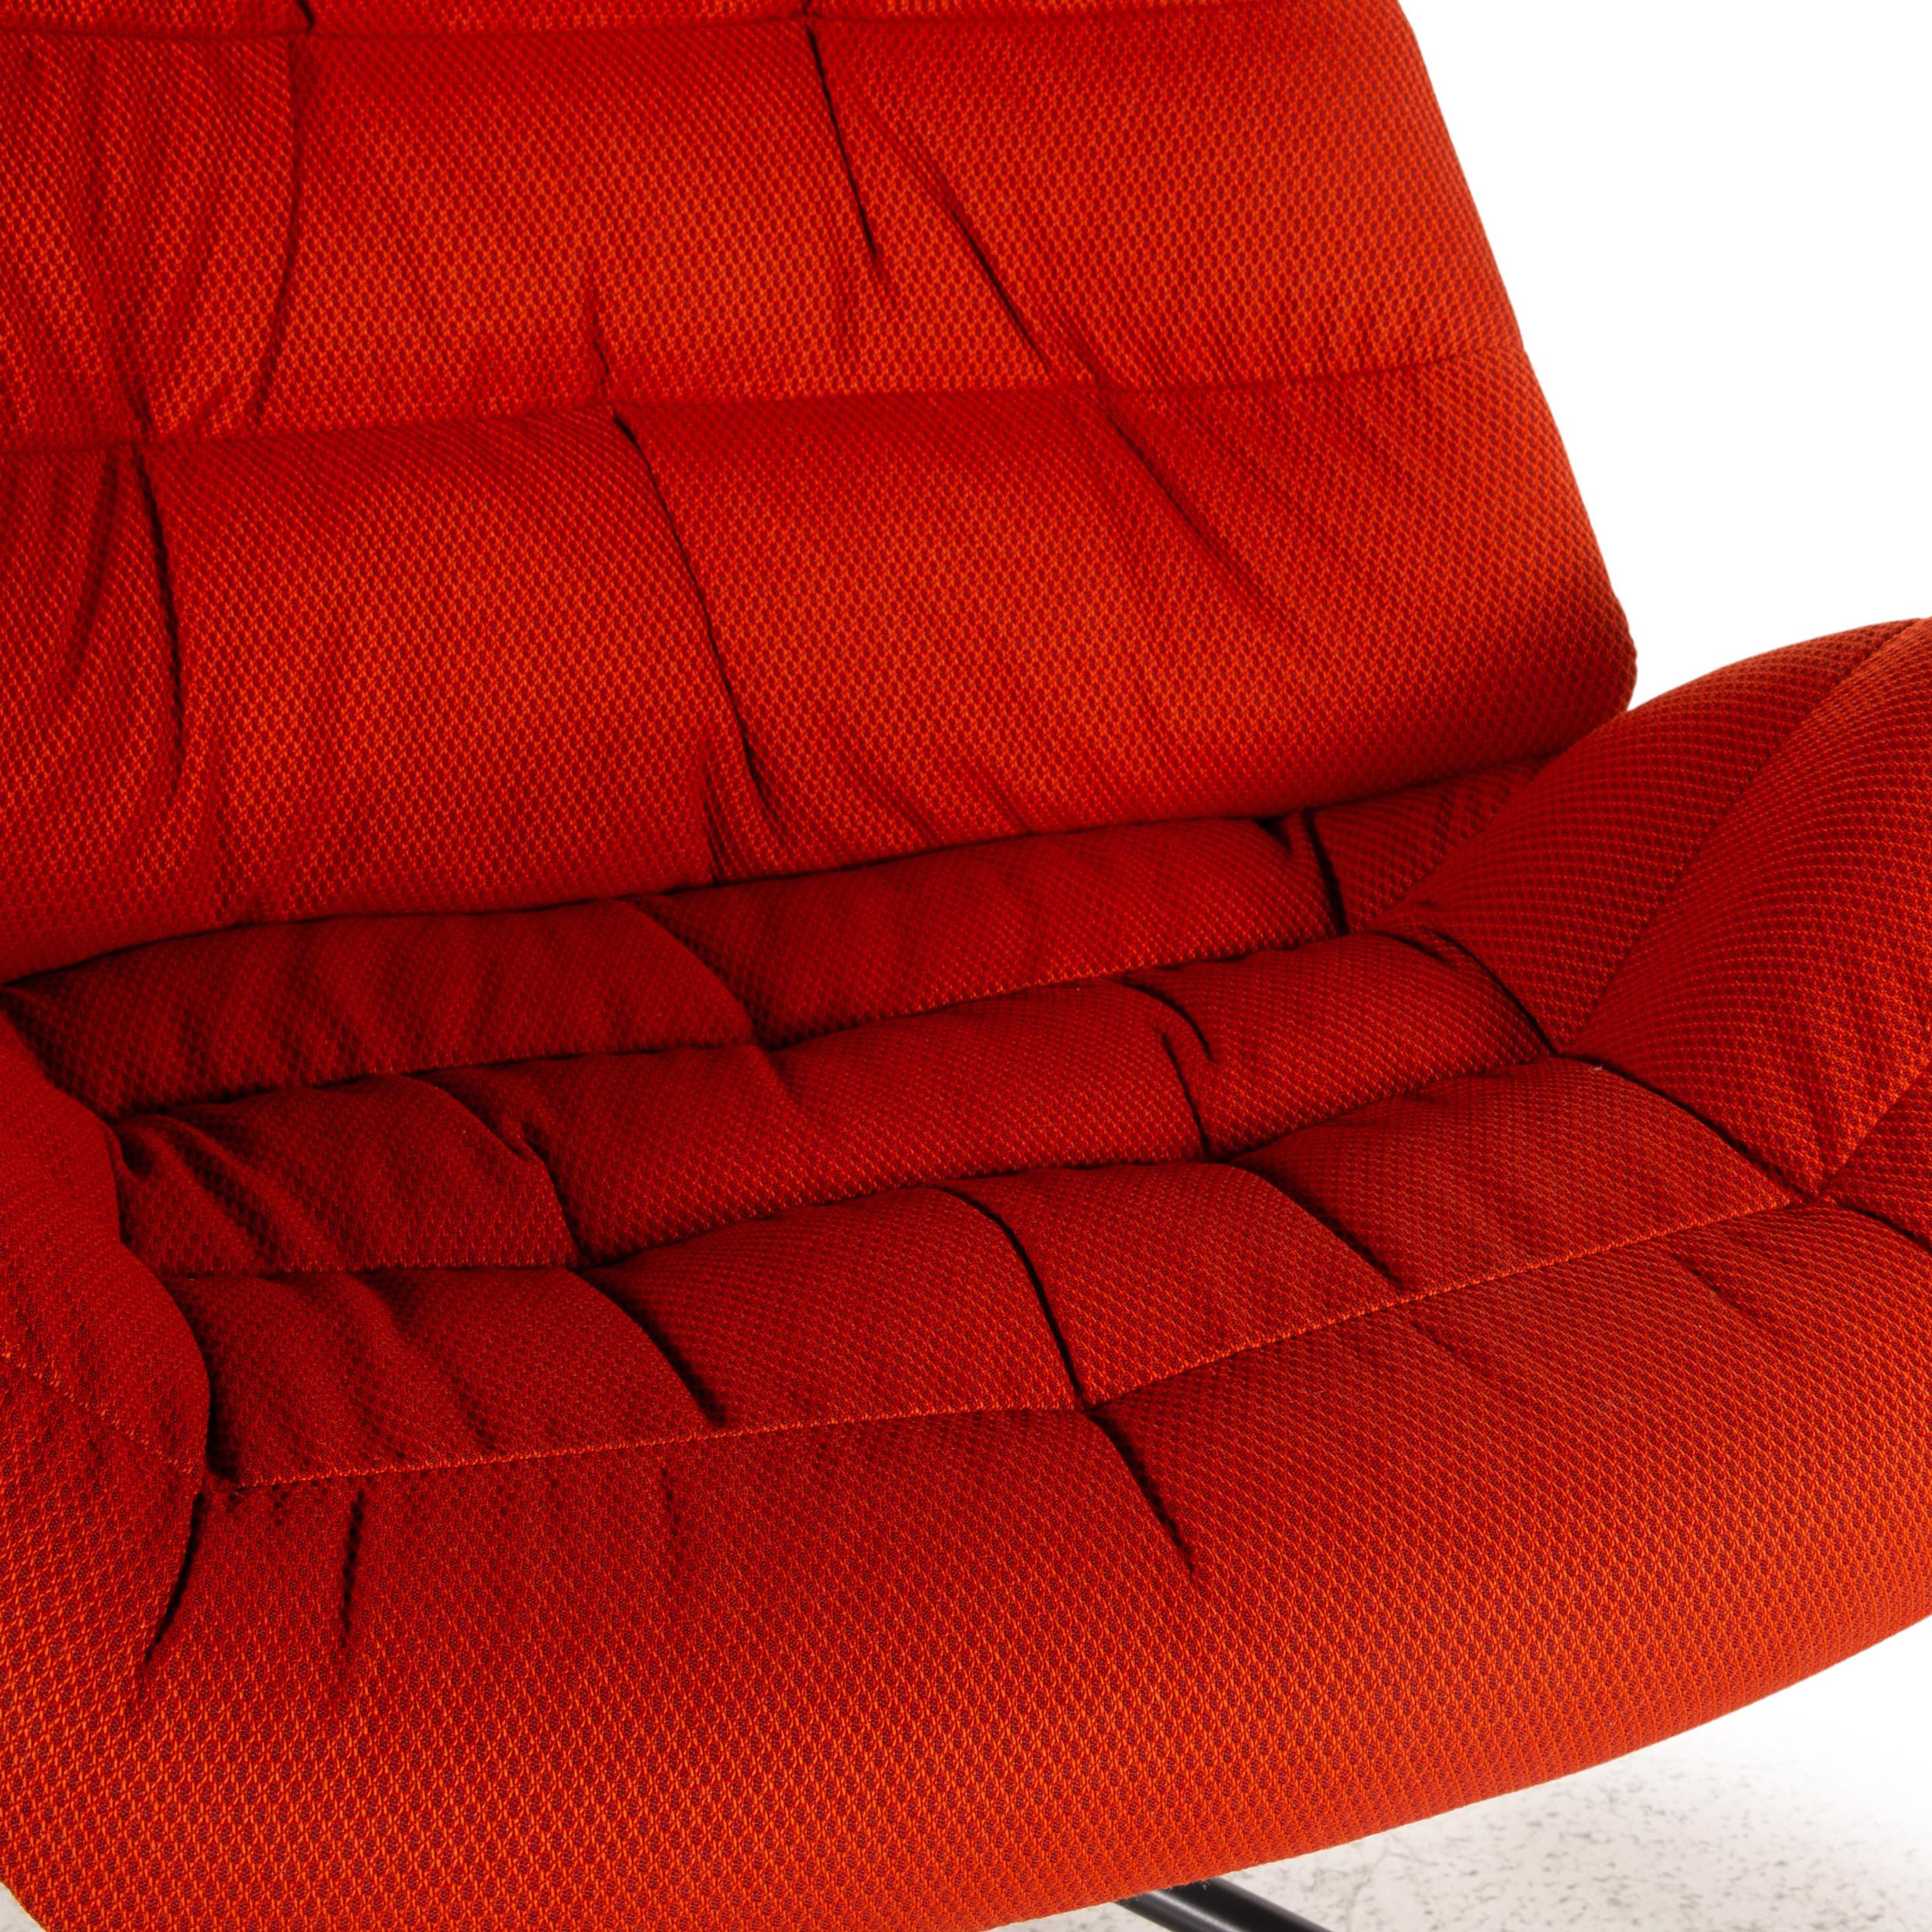 European Thonet 808 Fabric Armchair Incl. Stool Orange Armchair Function Relax Function For Sale